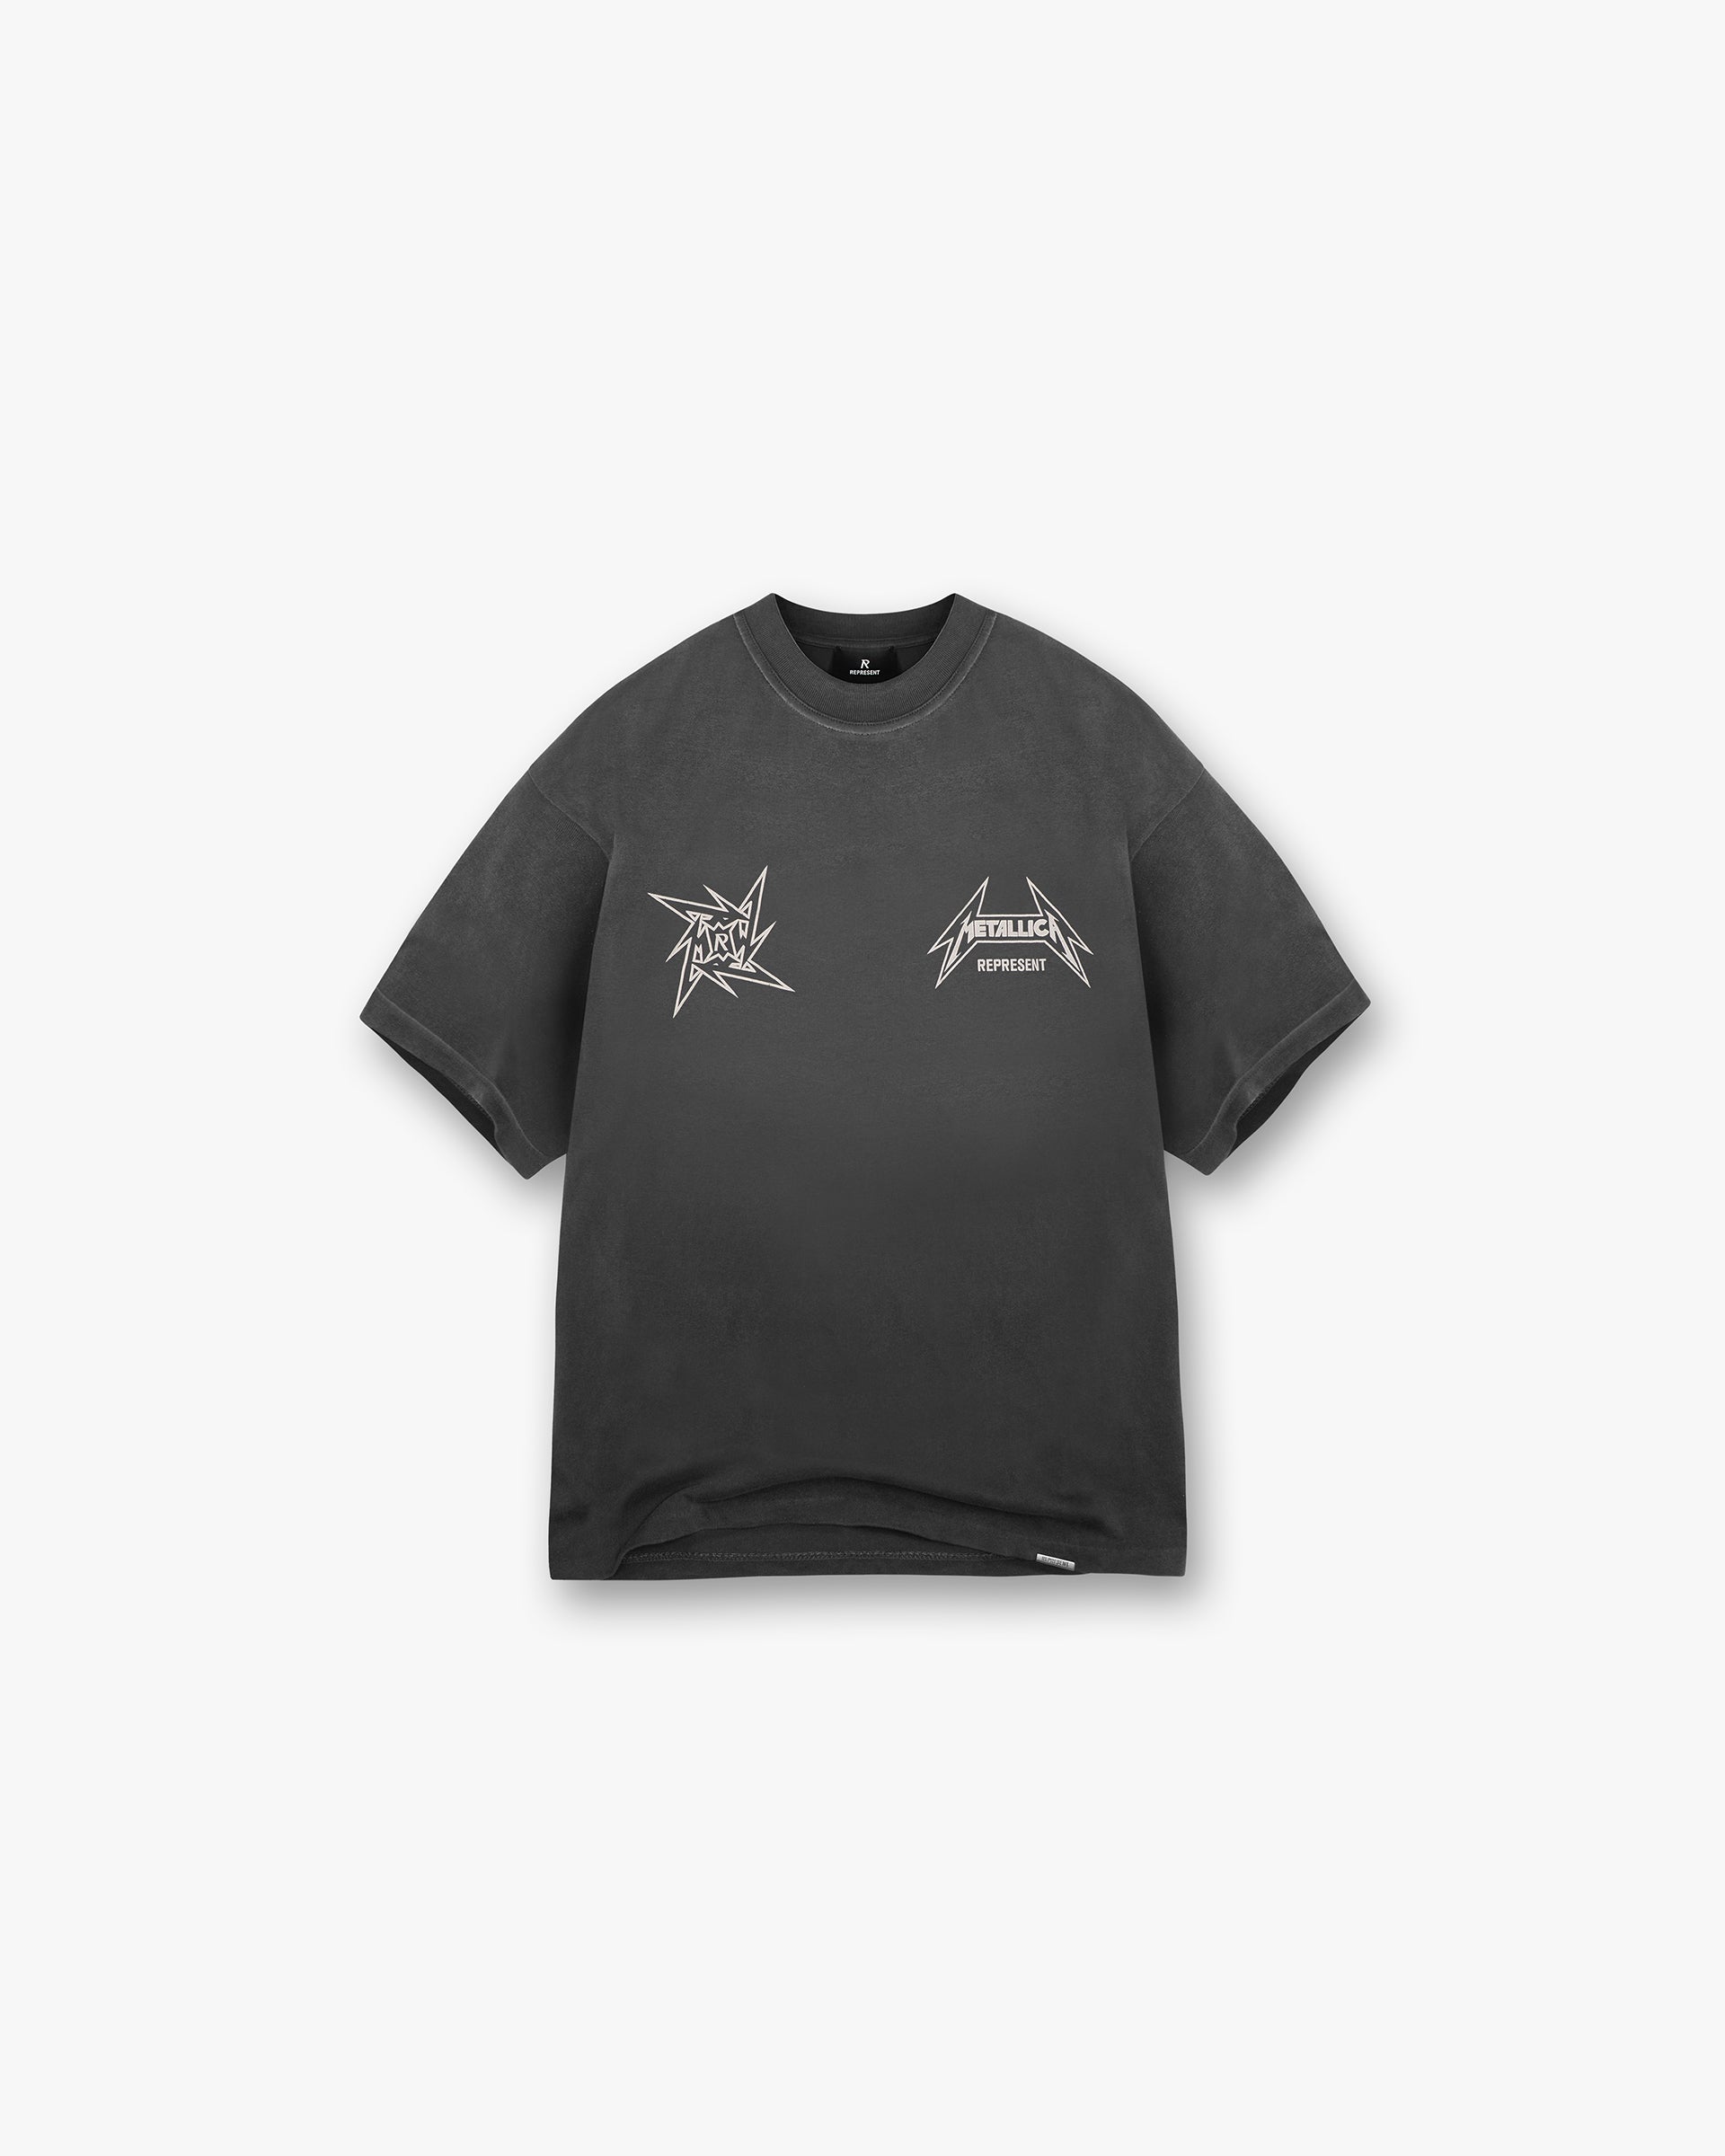 Represent X Metallica™️ Local Crew T-Shirt - Stained Black